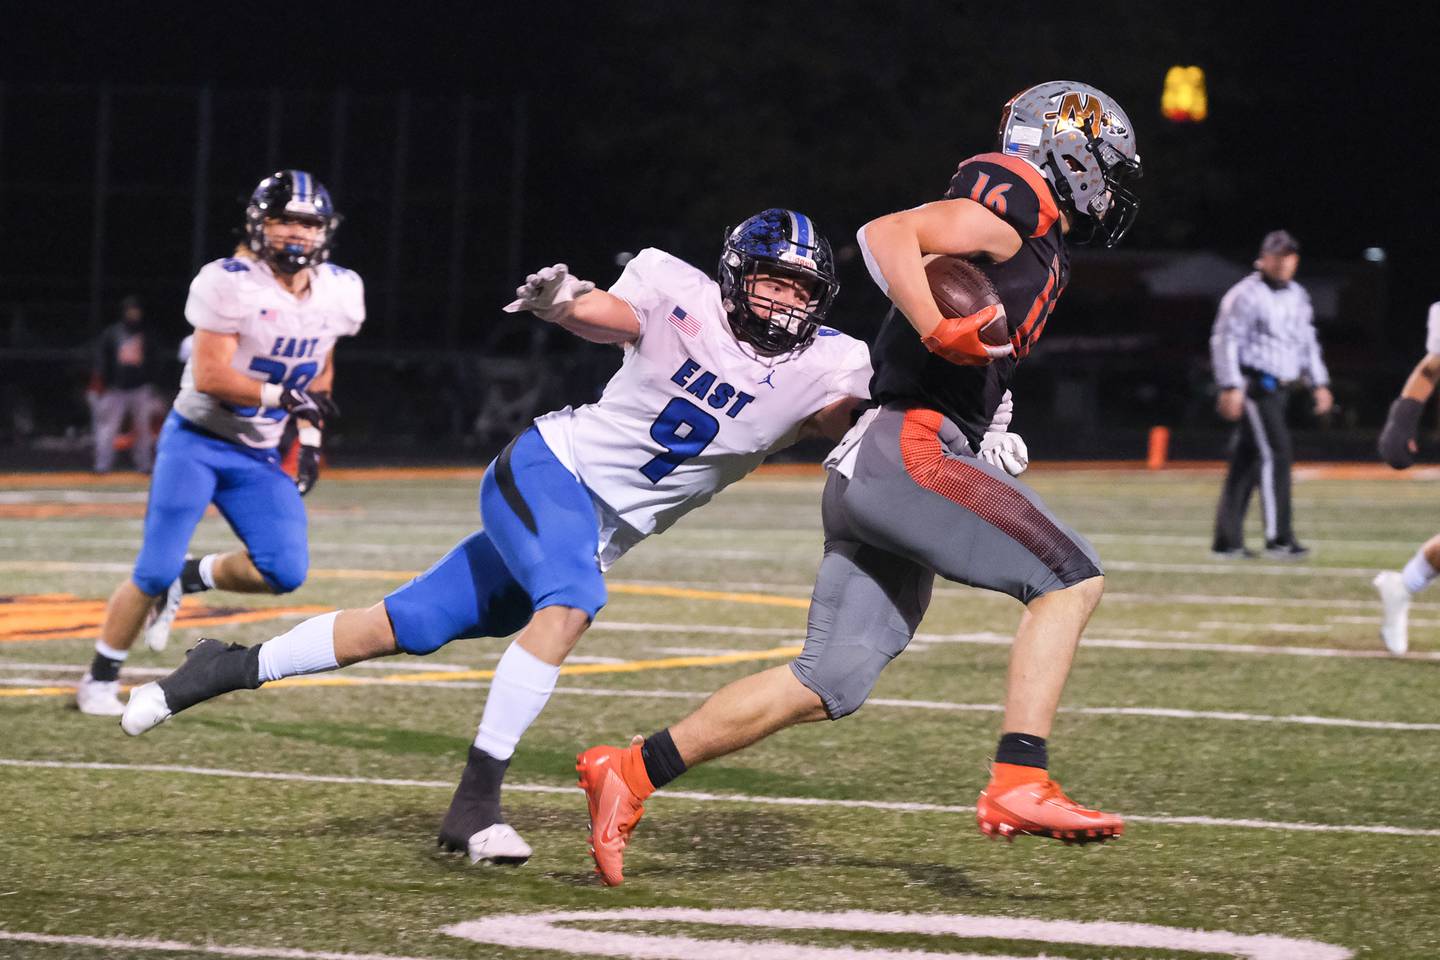 Lincoln-Way East's Michael Cardilli brings down Minooka's Ethan Murphy for no gain in the Class 8A 2nd round playoffs in Minooka on Saturday, Nov. 6, 2021.